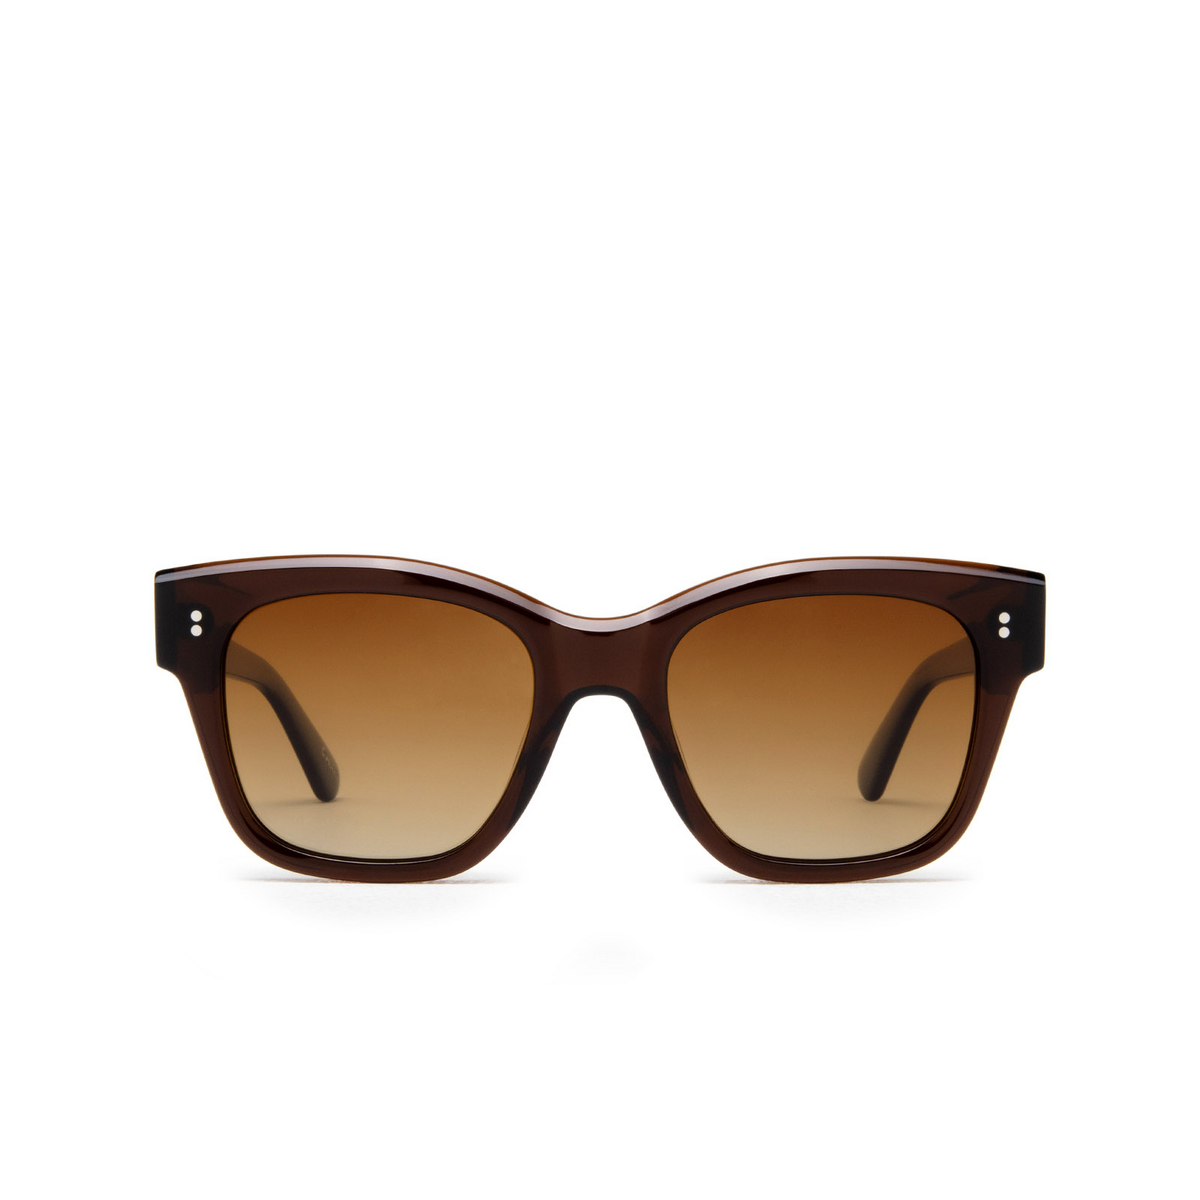 Chimi 07 Sunglasses BROWN - front view